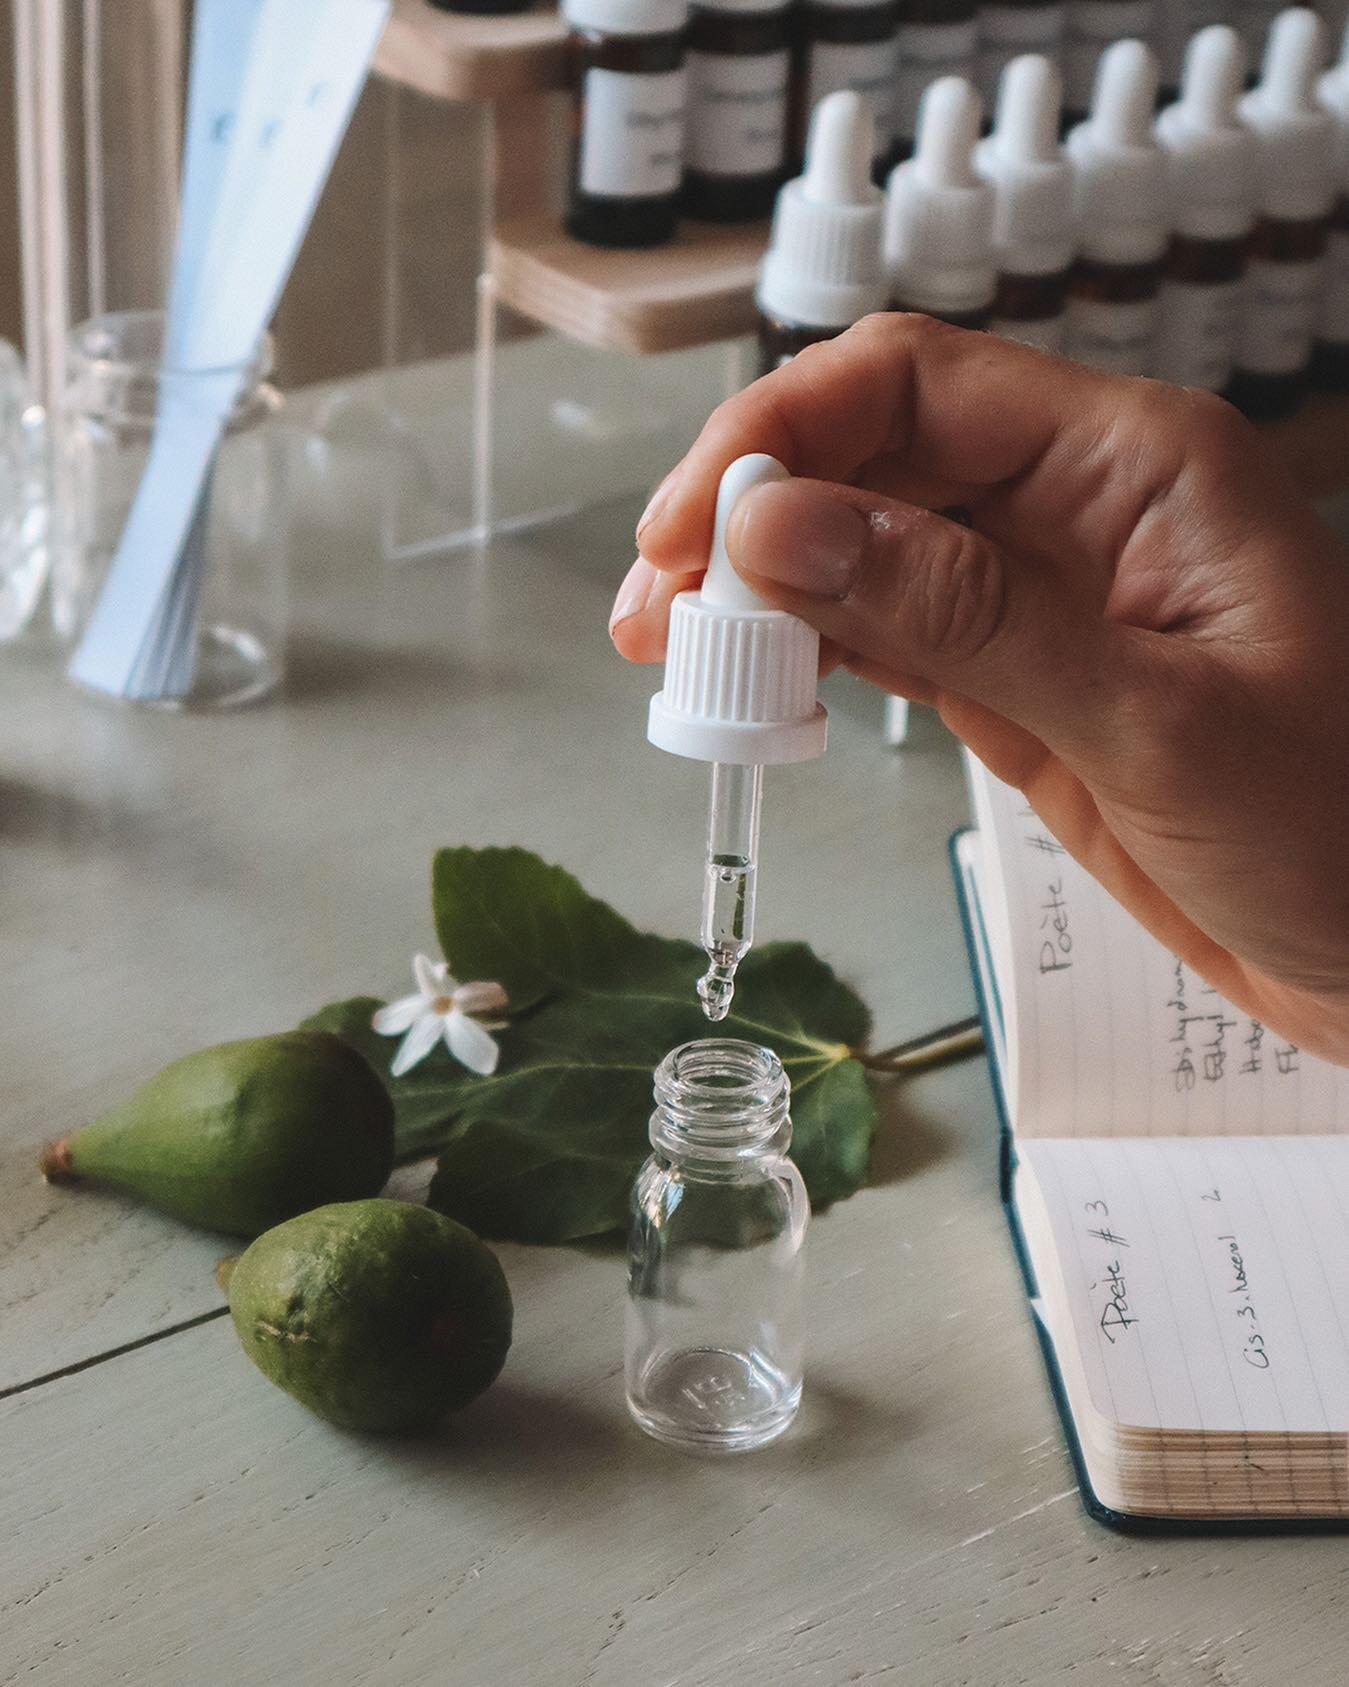 Our scents are carefully composed by our French perfumier. Using the finest ingredients from Grasse, France, they're the fragrances fashion has been waiting for.
.
.
.
#comingsoon #scentedsecret #po&egrave;te #fragrance #fabricandfragrance #morningro